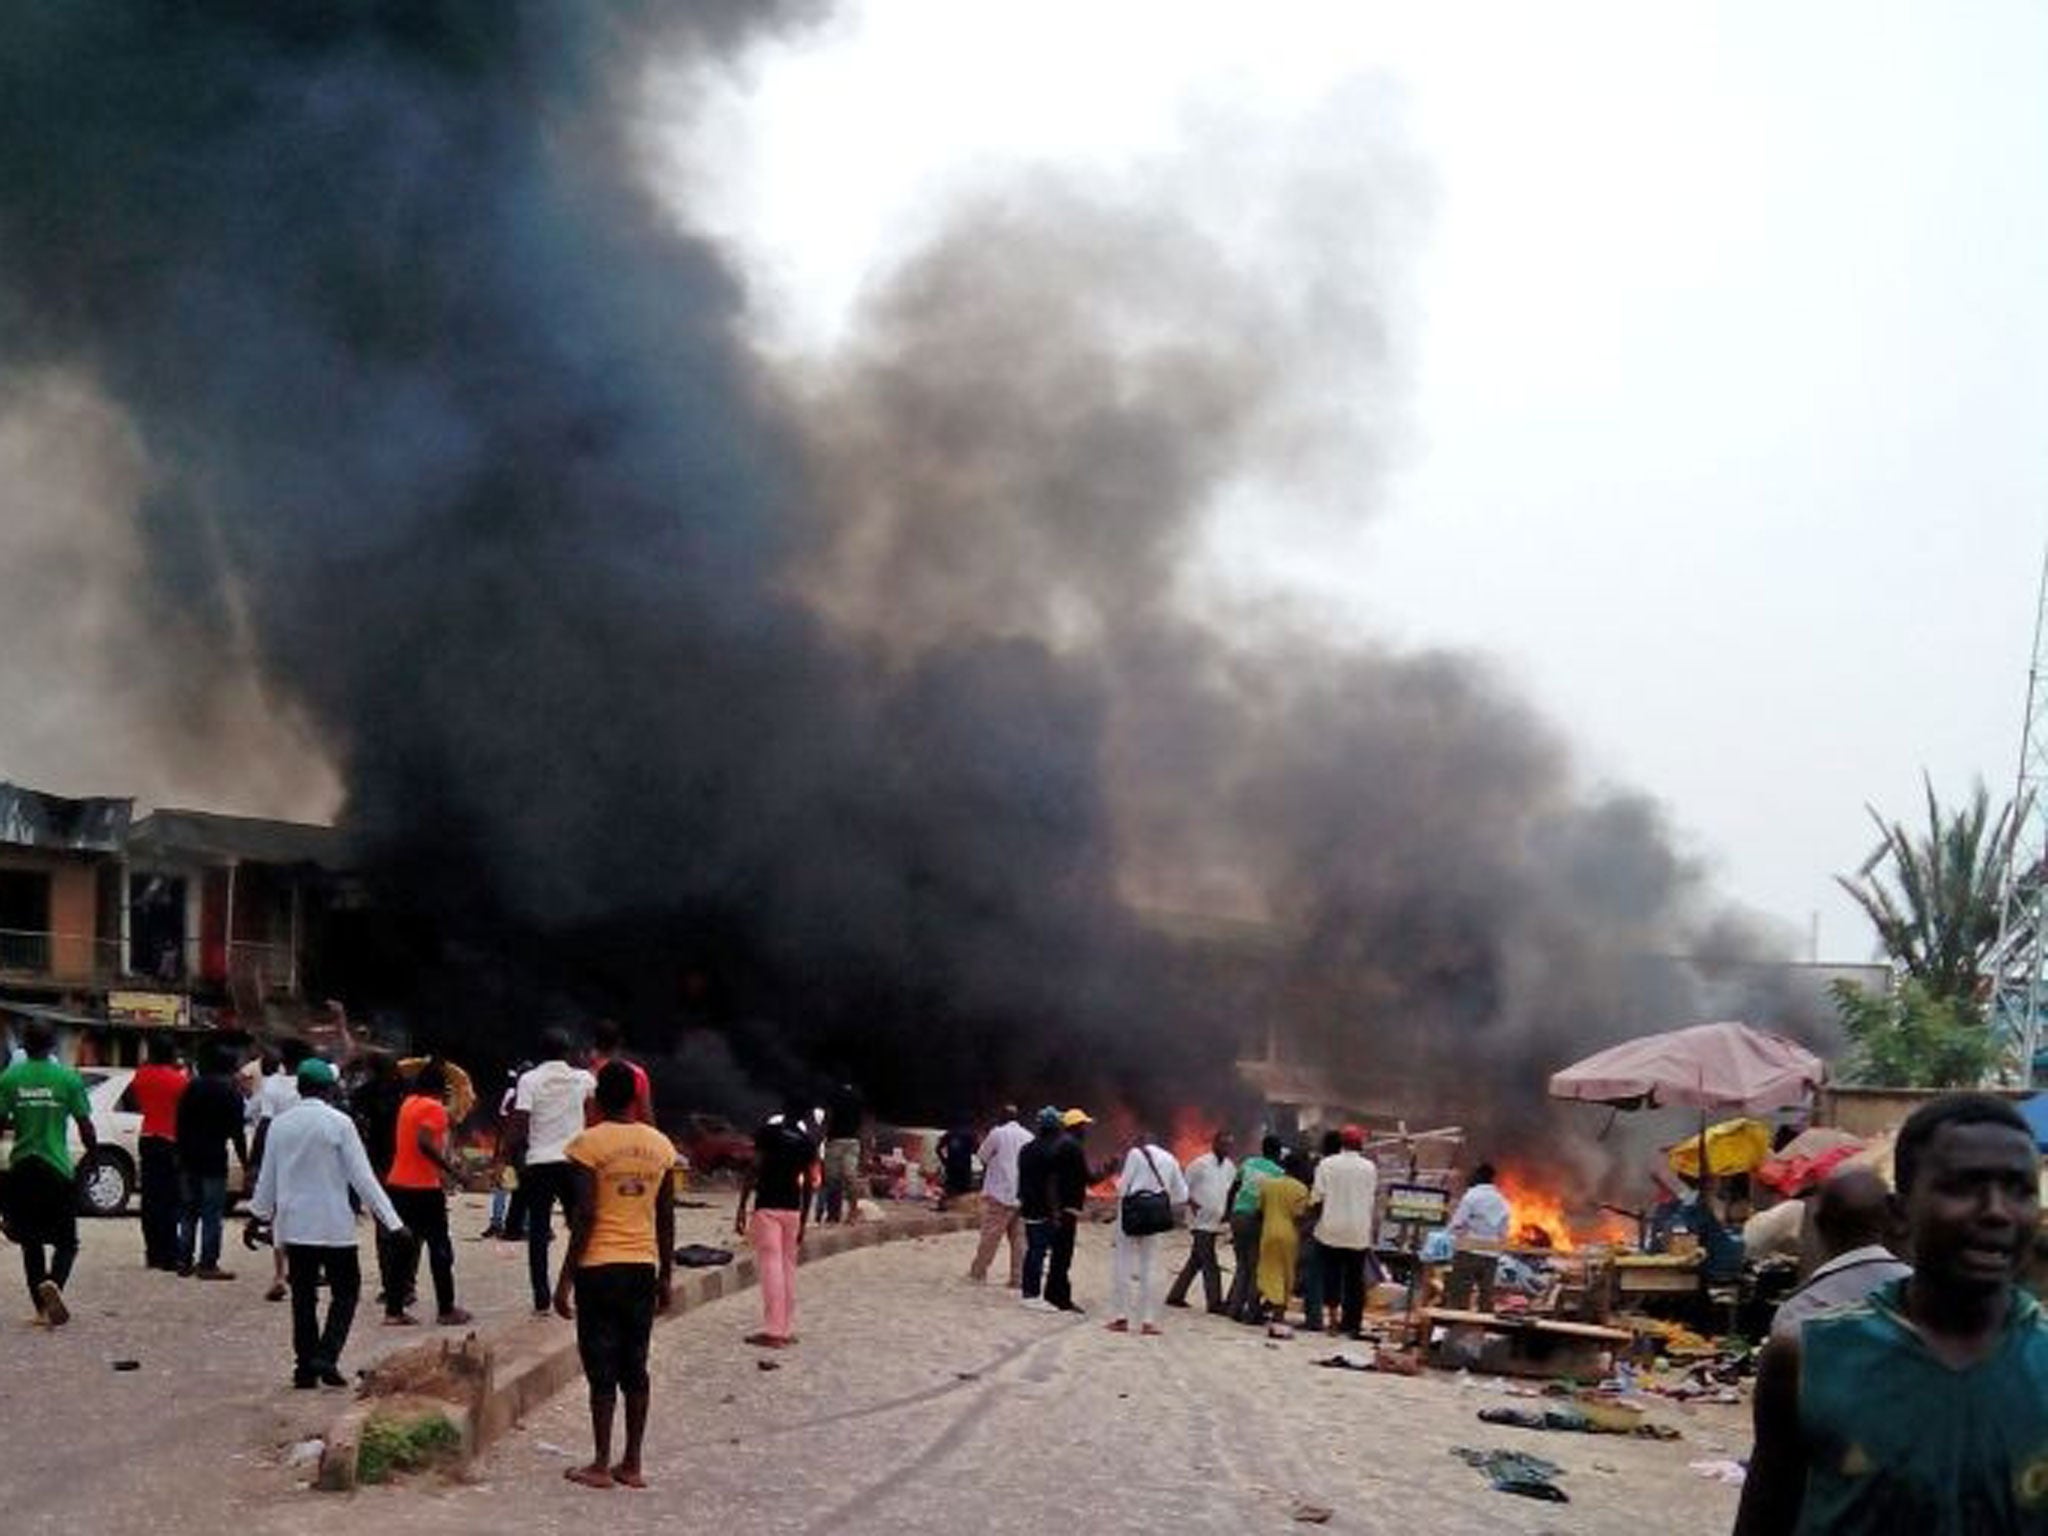 Smoke rises after a bomb blast at a bus terminal in Jos, Nigeria, Tuesday, May 20, 2014. Two explosions ripped through a bustling bus terminal and market frequented by thousands of people in Nigeria's central city of Jos on Tuesday afternoon, and police s